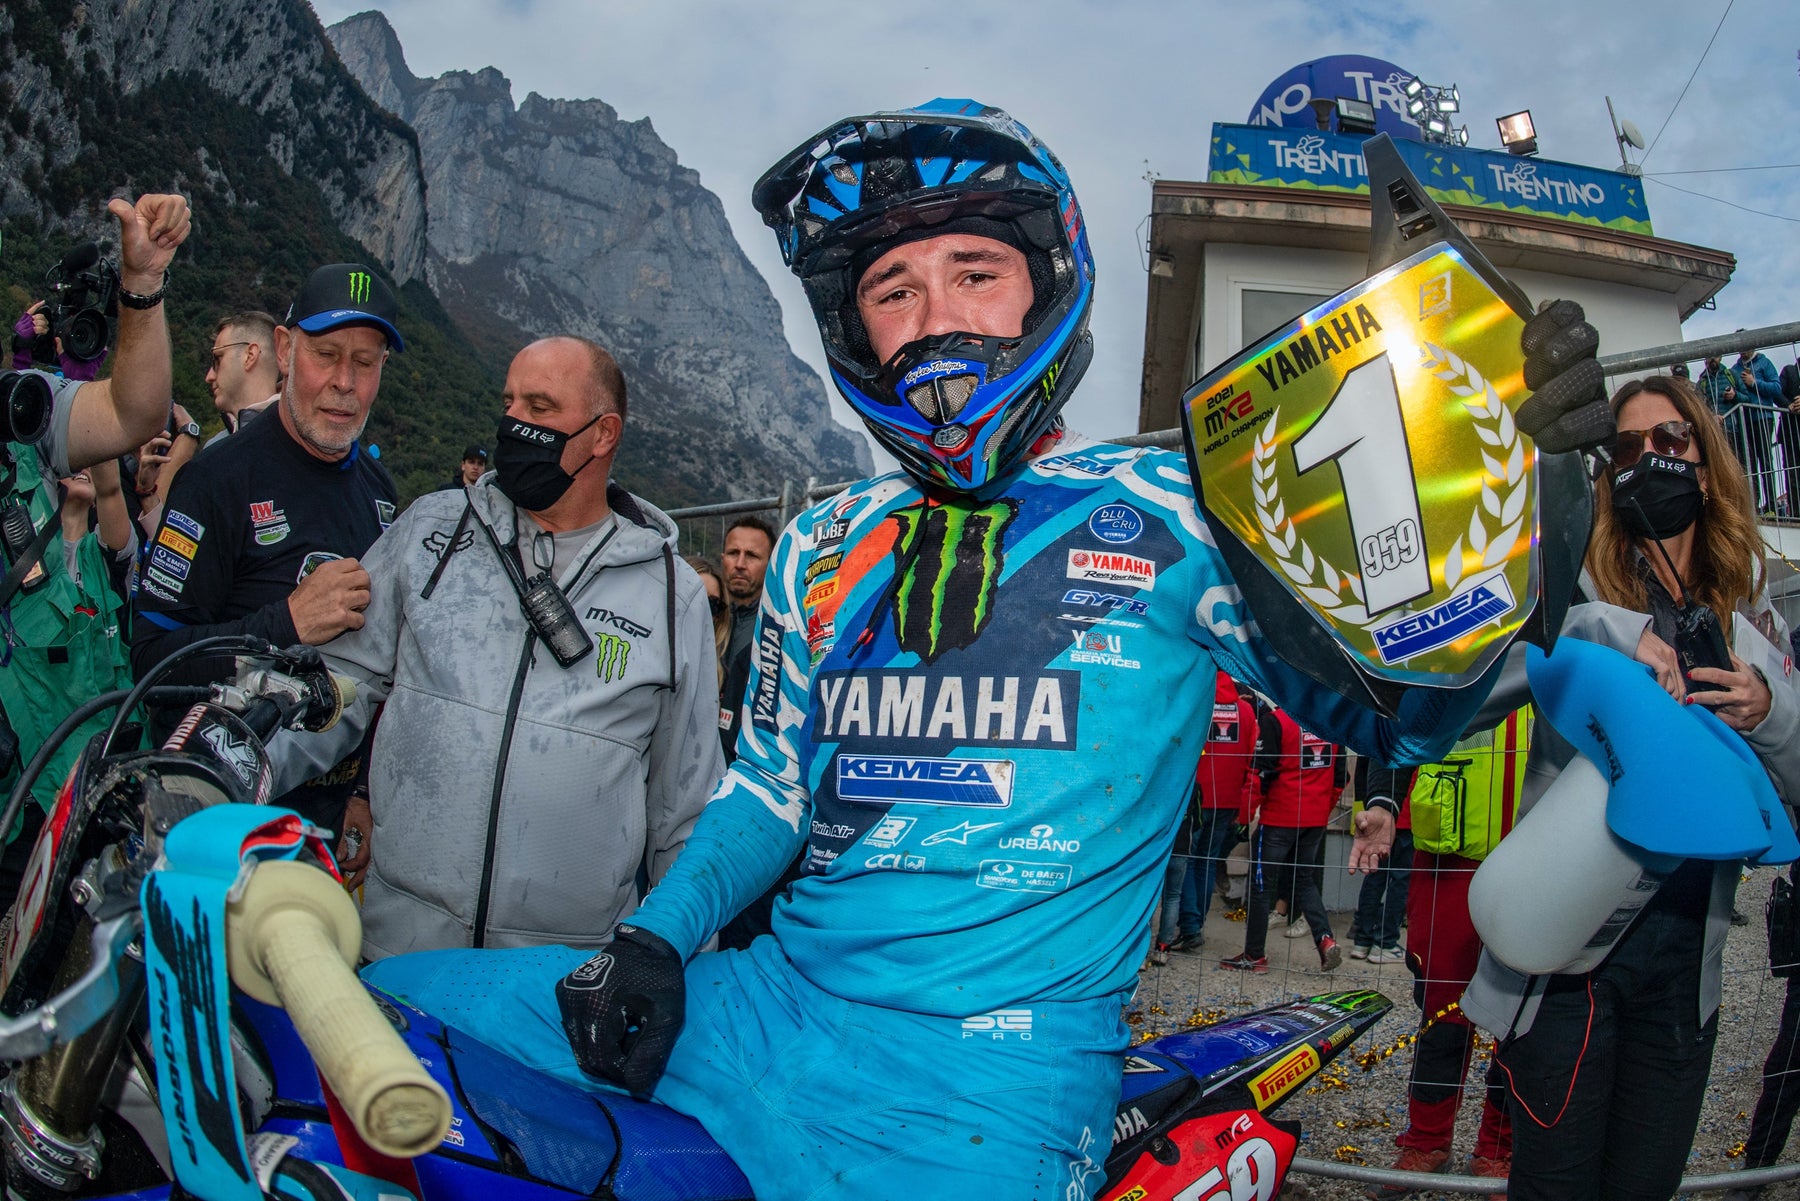 MAXIME RENAUX IS THE 2021 MX2 WORLD CHAMPION!